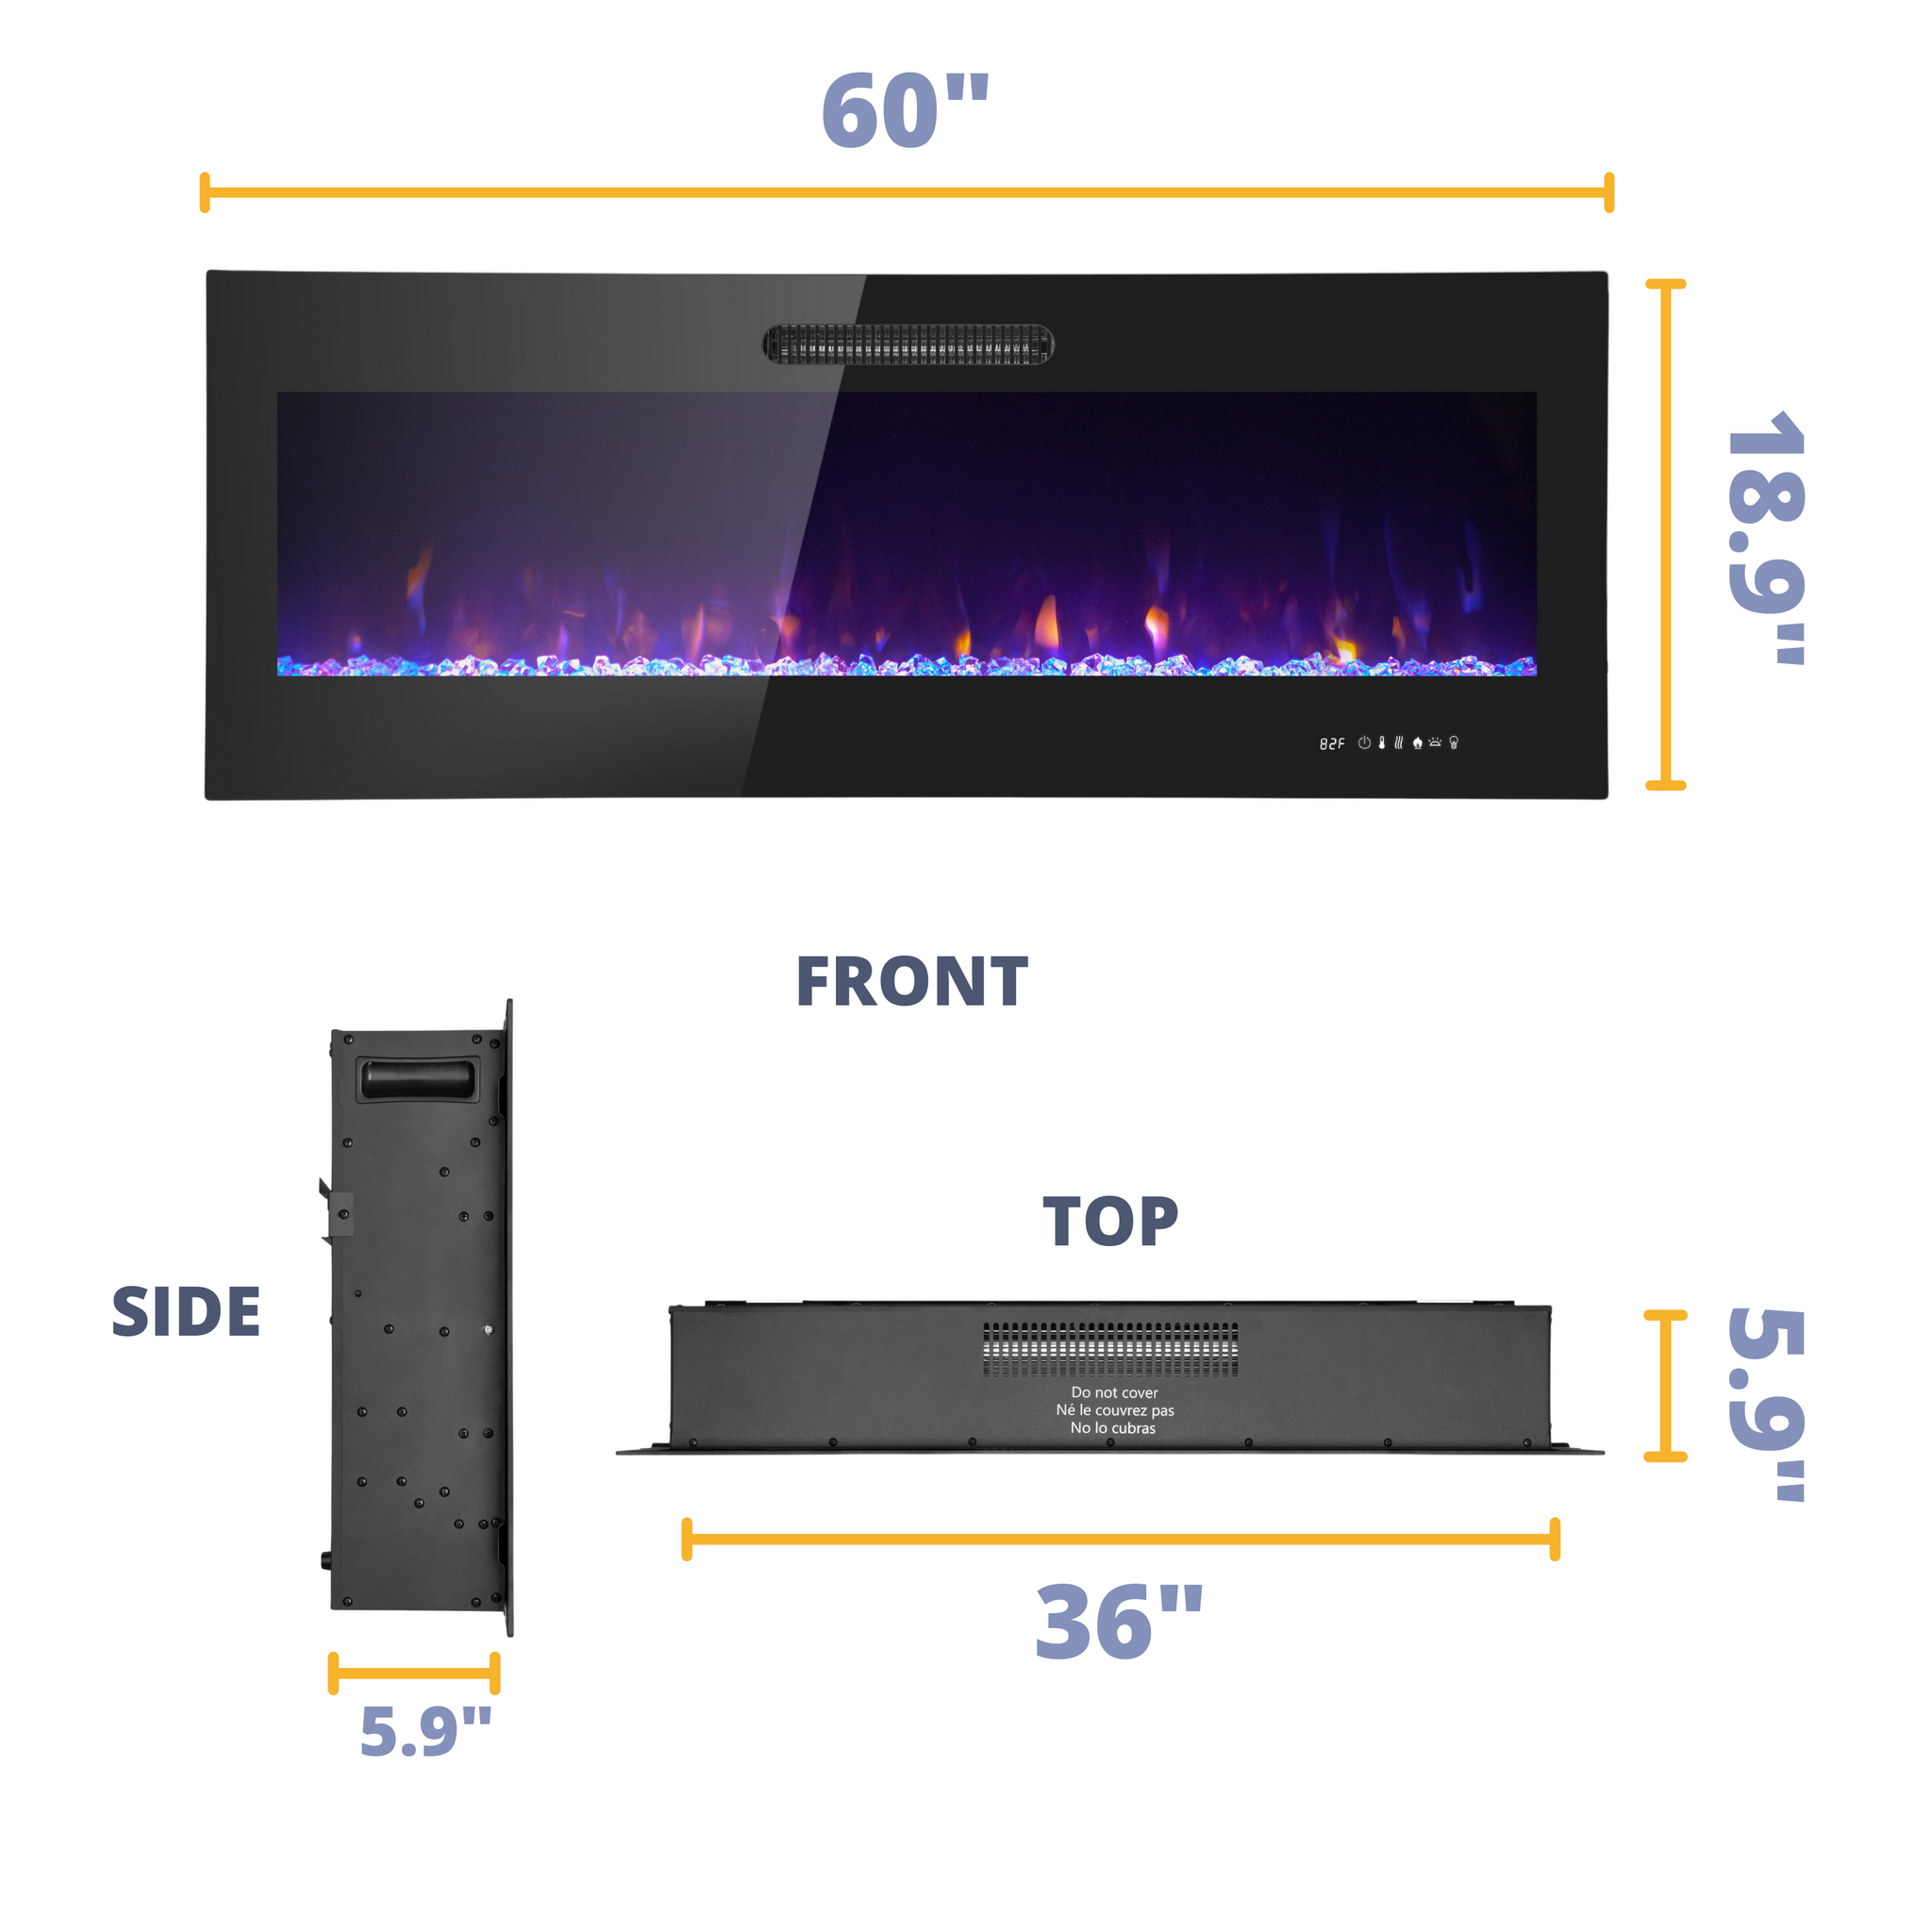 60 Inch LED Slim Design Electric Fireplace Insert and Wall Mounted Fireplace with 1500 Watt Heater, Log & Crystal Ember Options, Adjustable Realistic Flame and Remote Control by Prominence Home